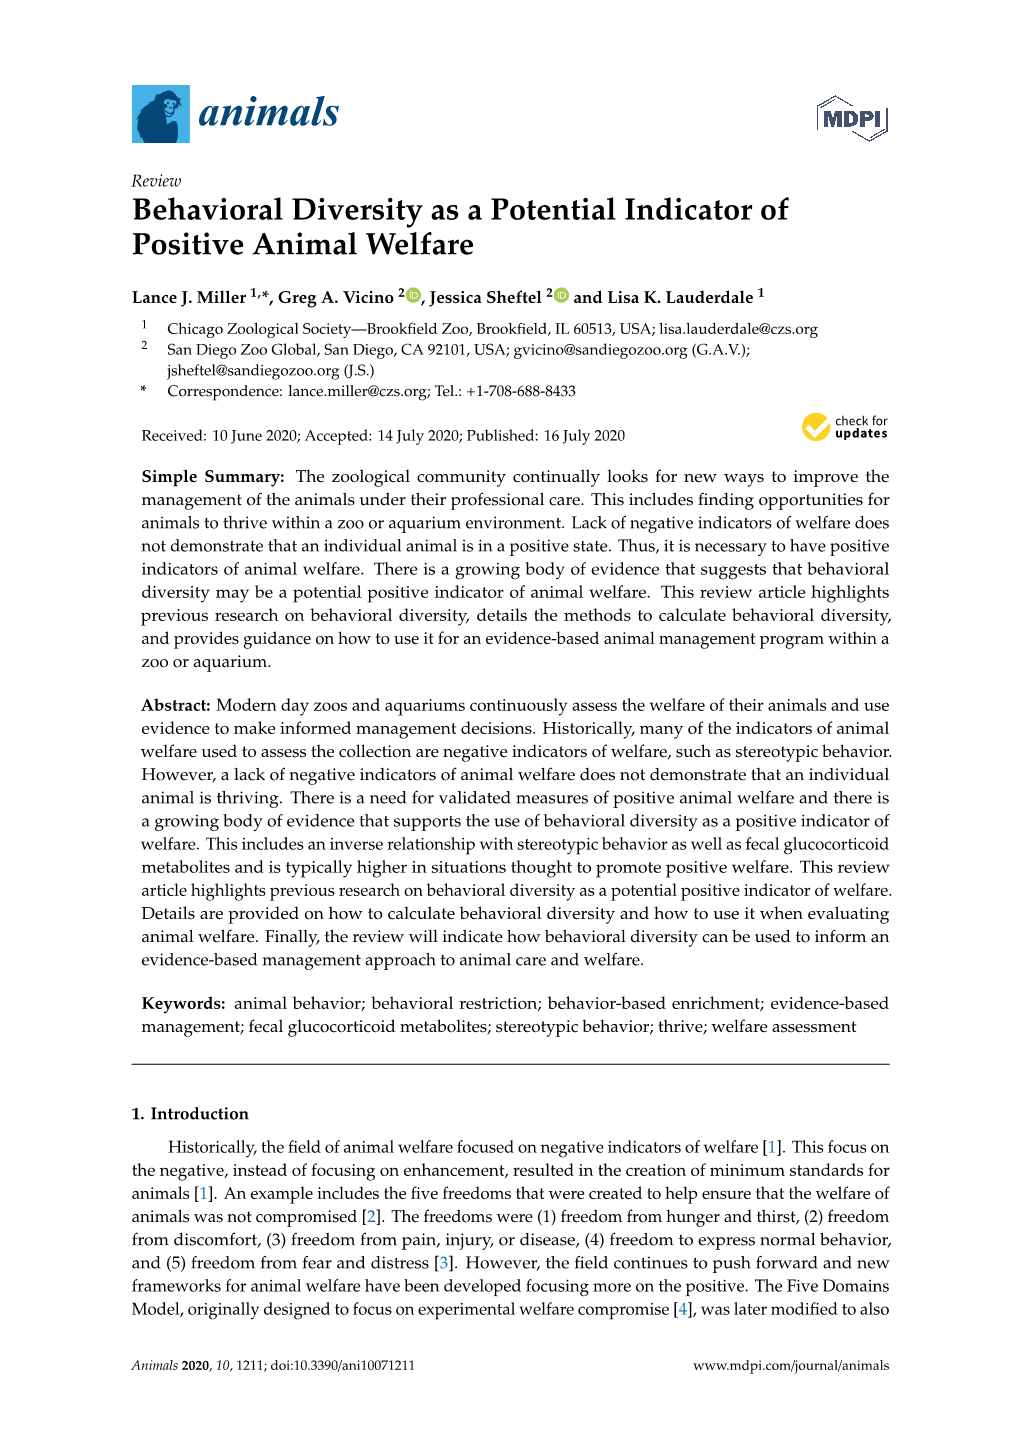 Behavioral Diversity As a Potential Indicator of Positive Animal Welfare